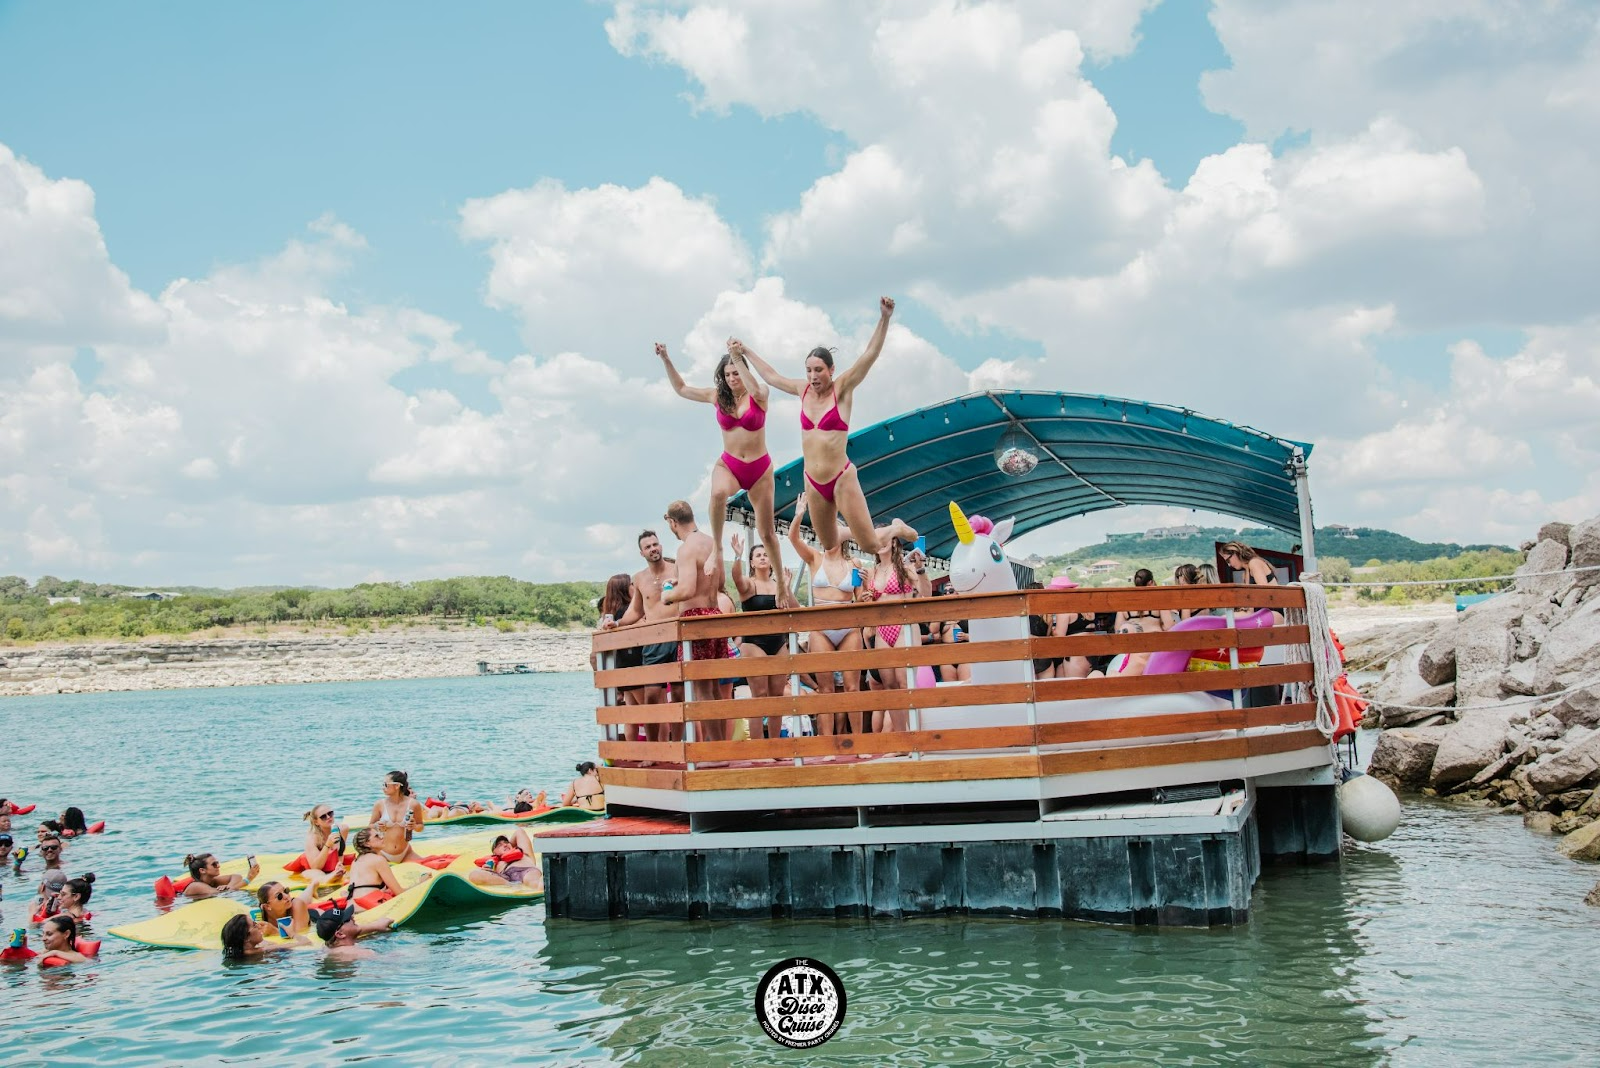 ATX Disco Cruise fun and excitement with Premier Party Cruises: The party never stops